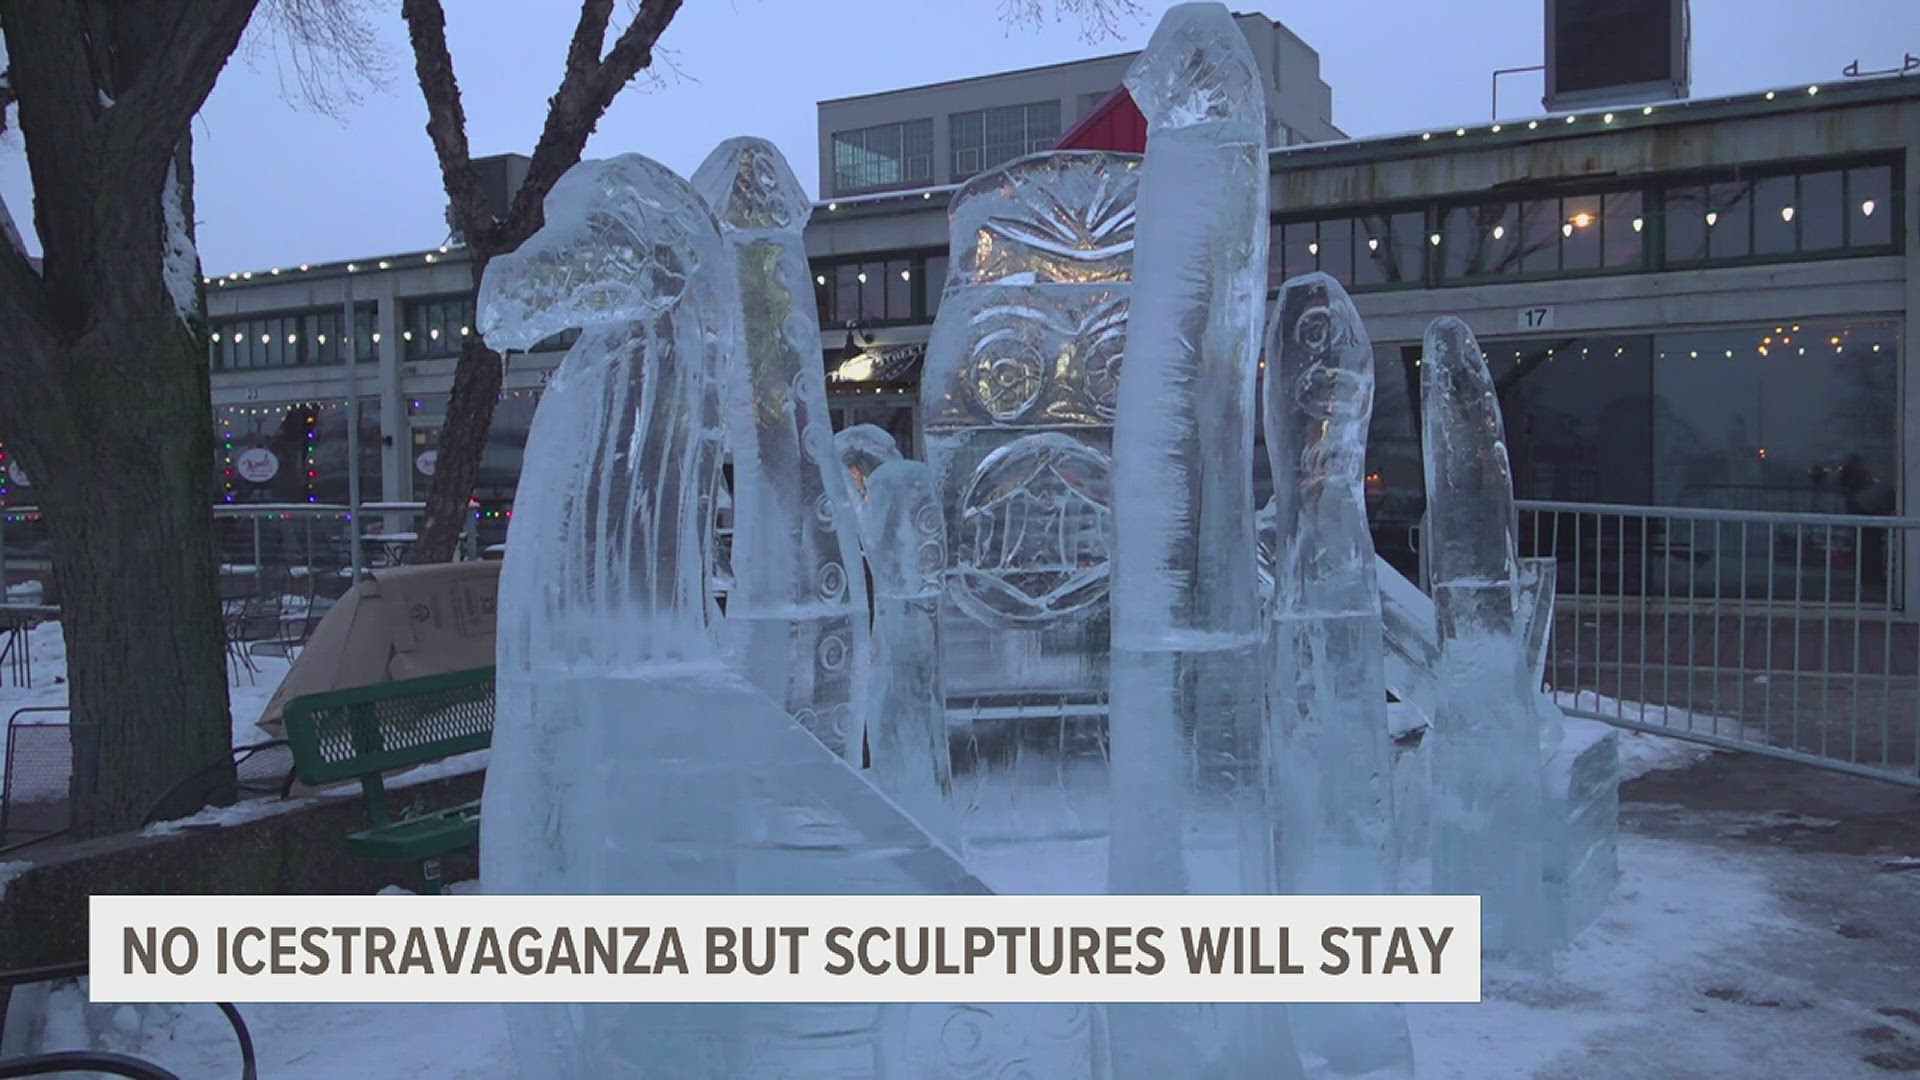 Ice sculptors said they expect their works to last for two to three weeks.